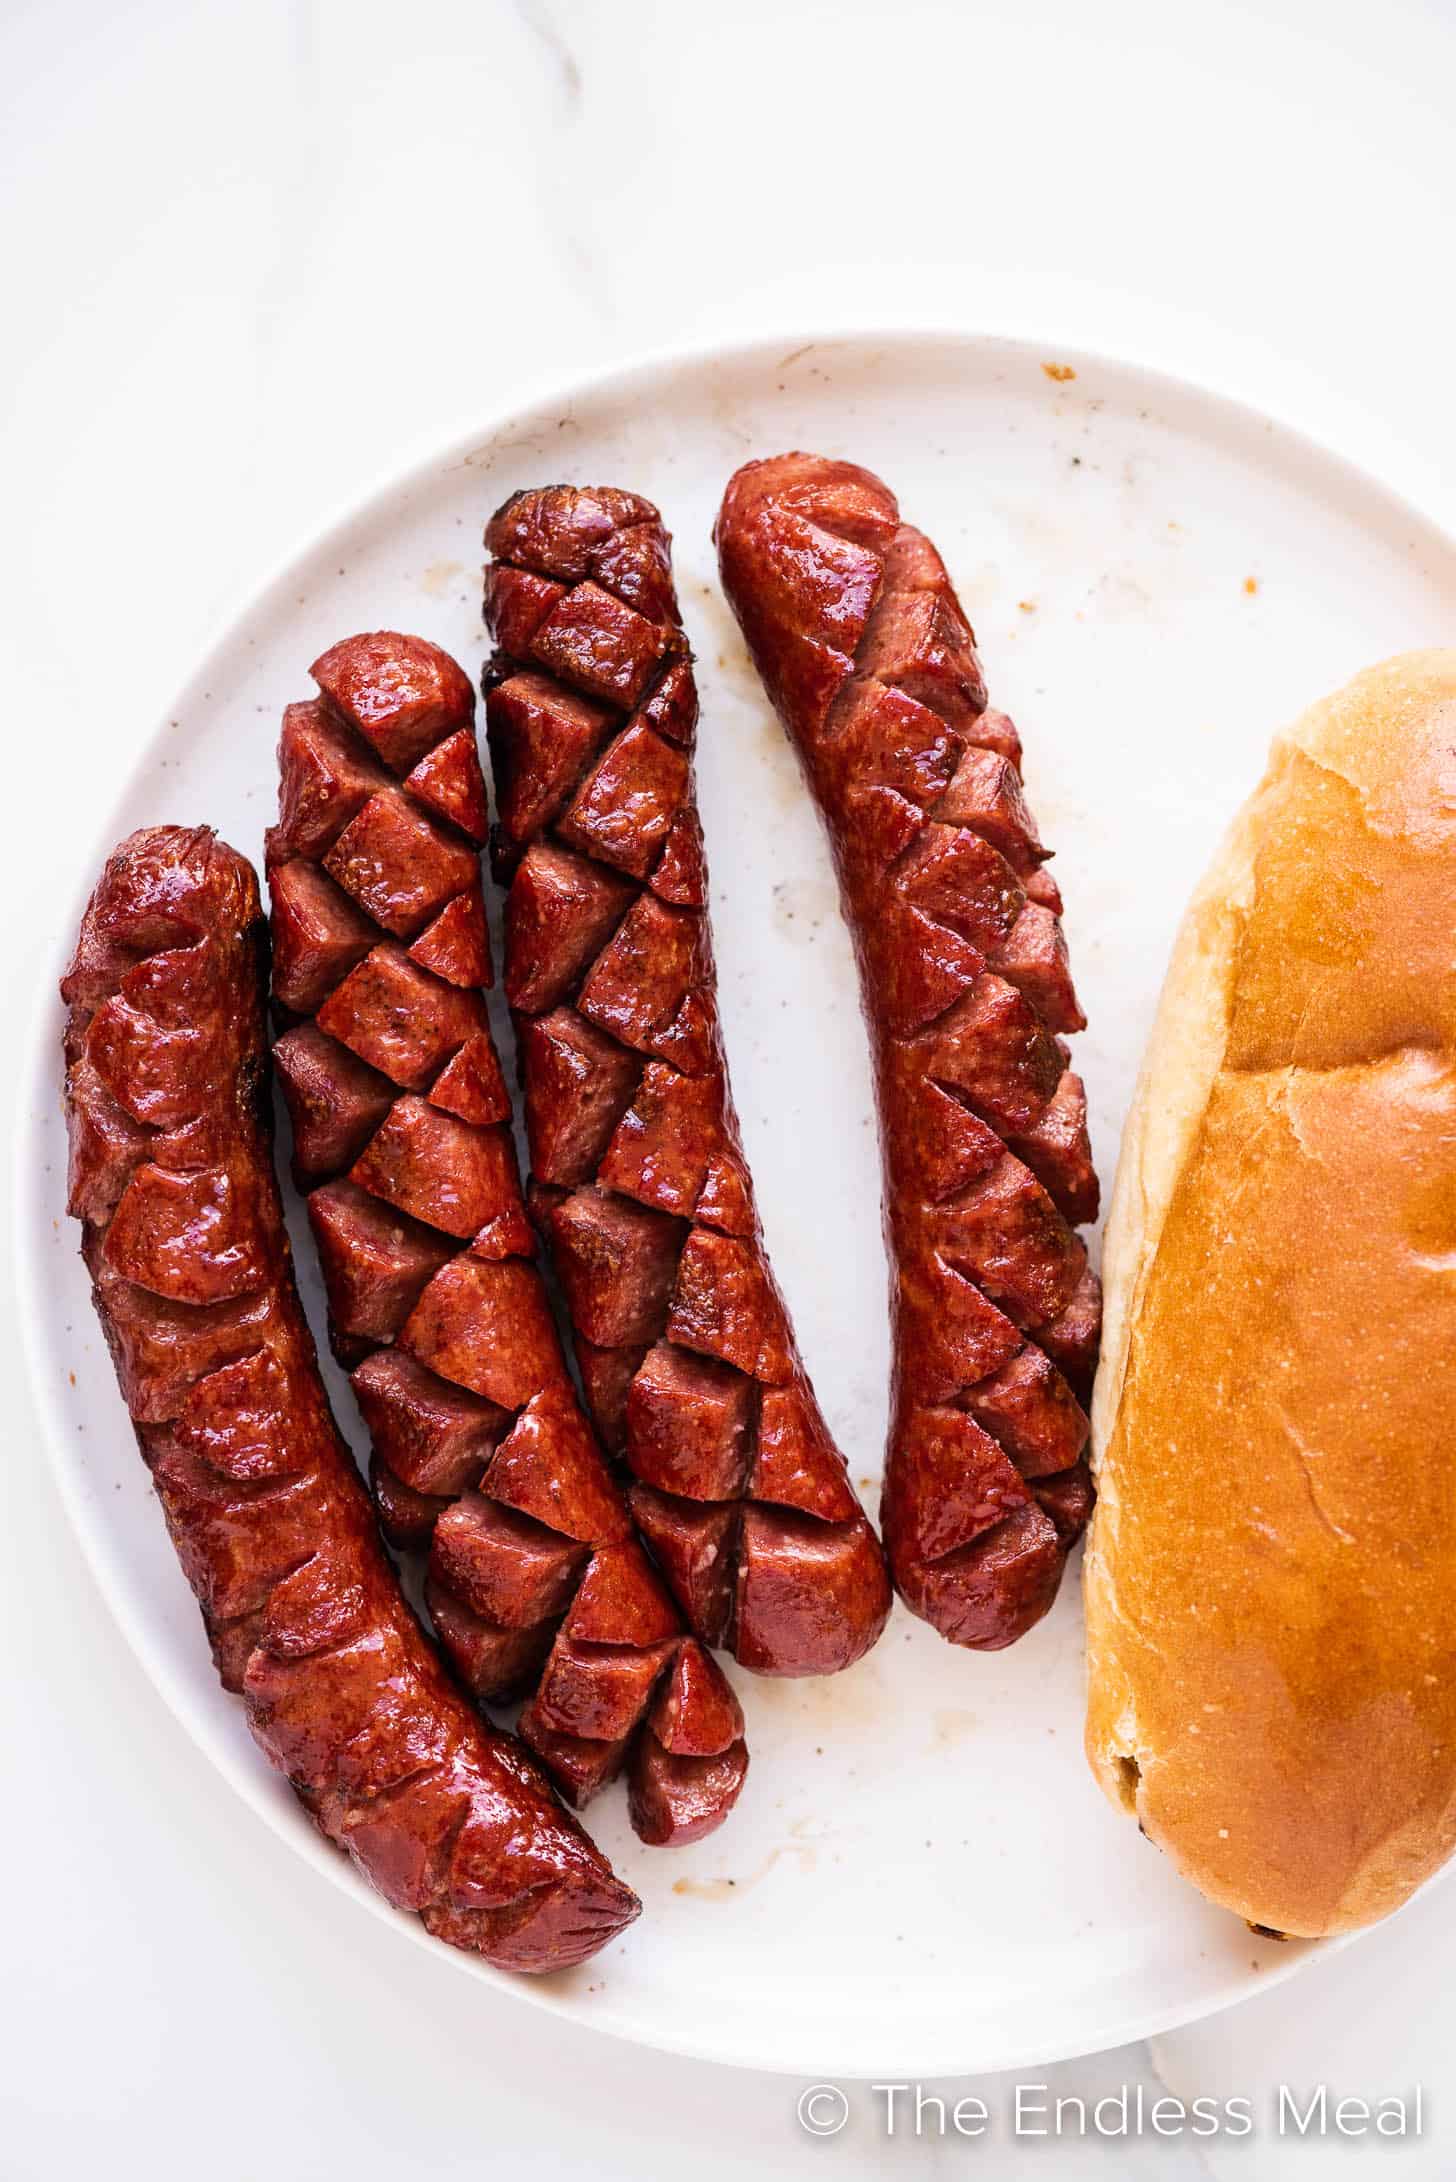 grilled hot dogs and buns on a plate